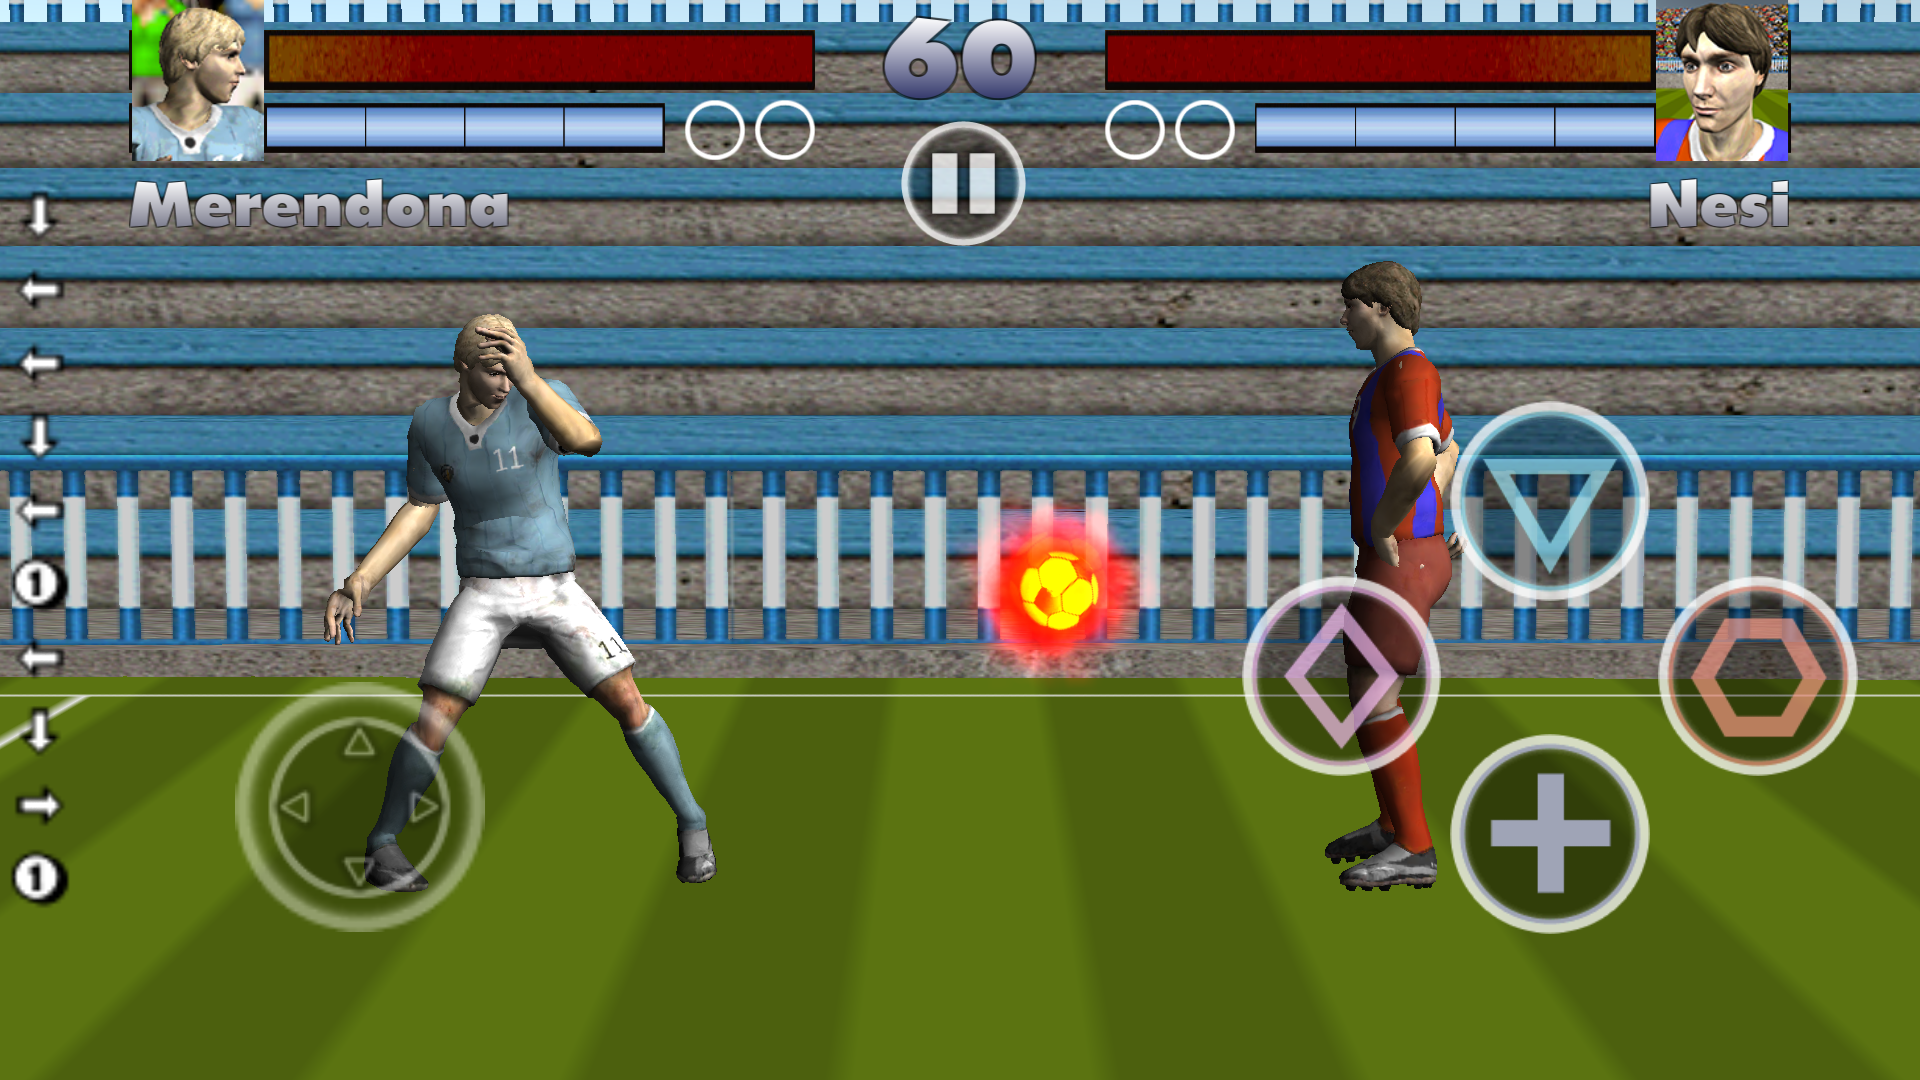 Soccer Players Fight 2016 androidアプリスクリーンショット2